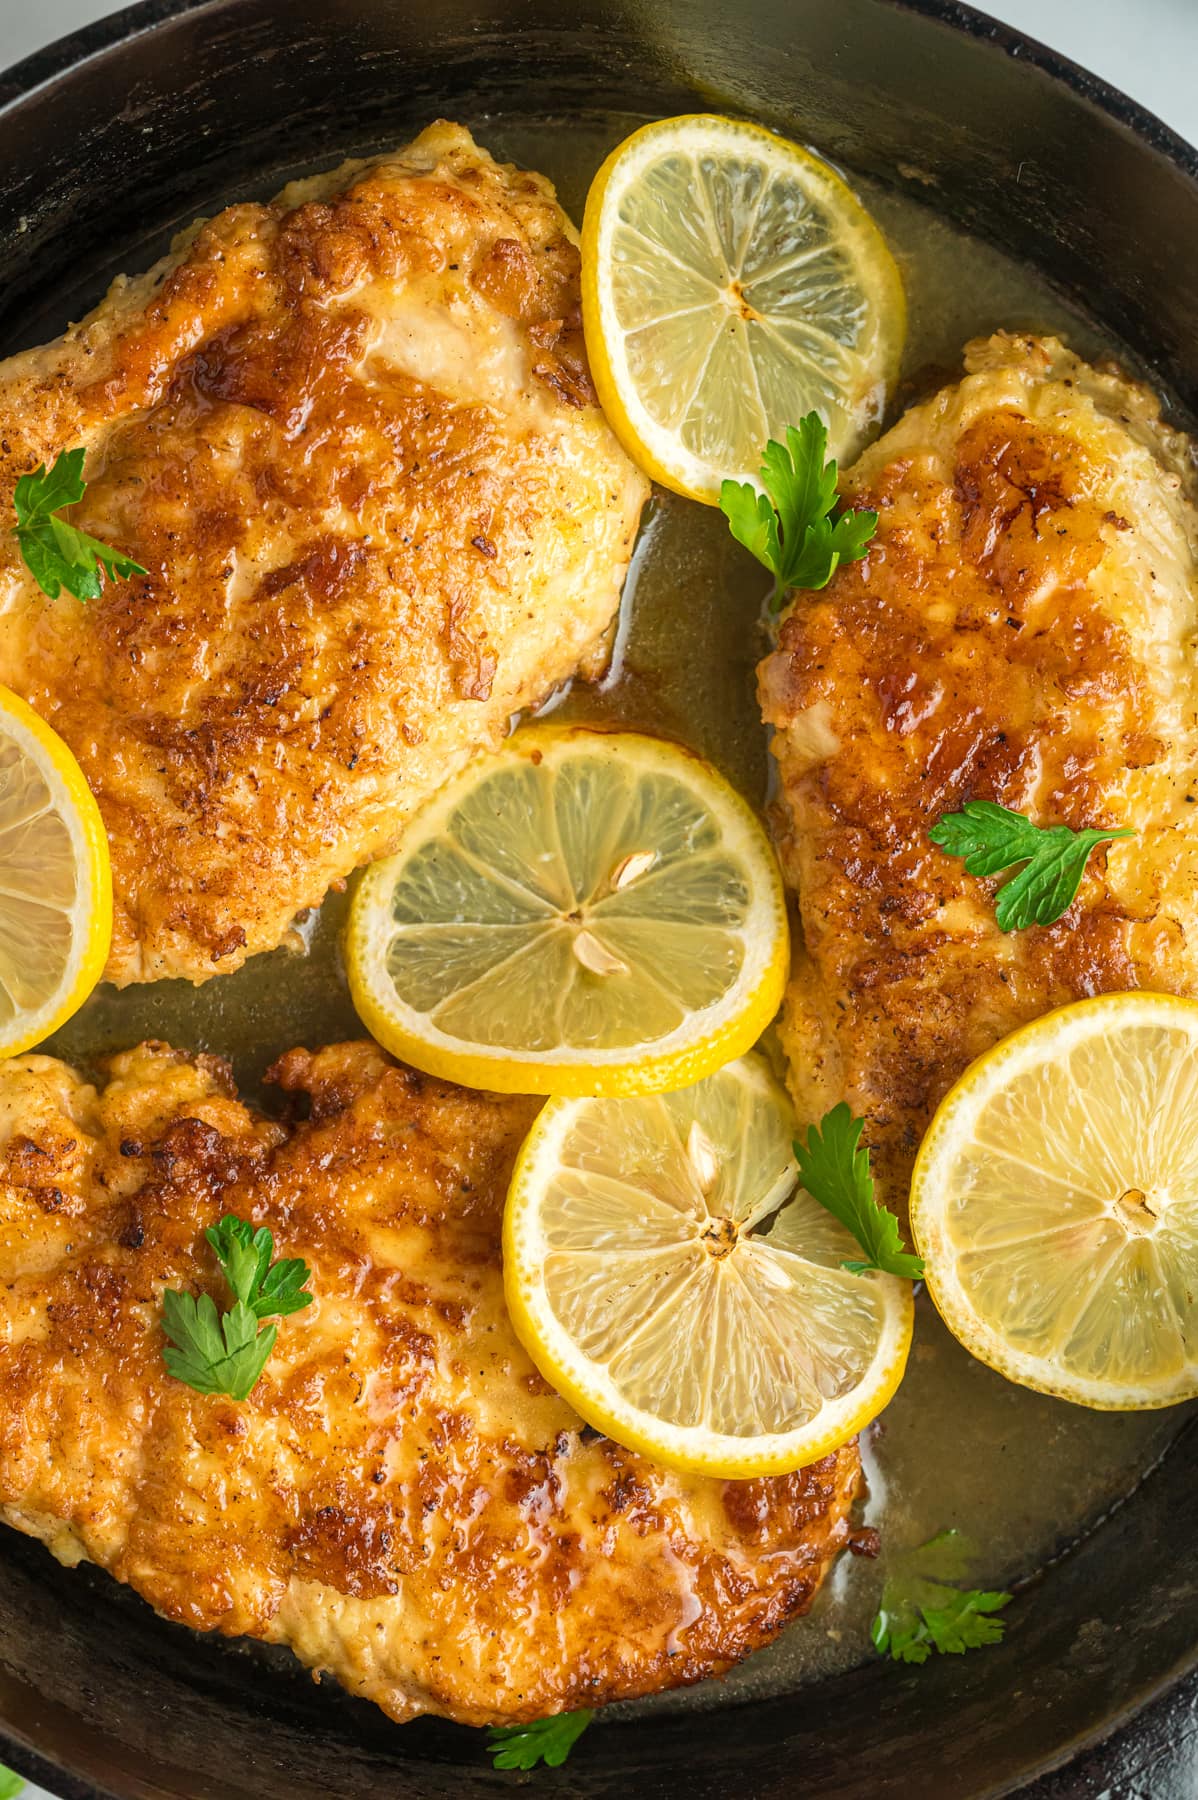 Overhead view of chicken breasts topped with slices of lemon